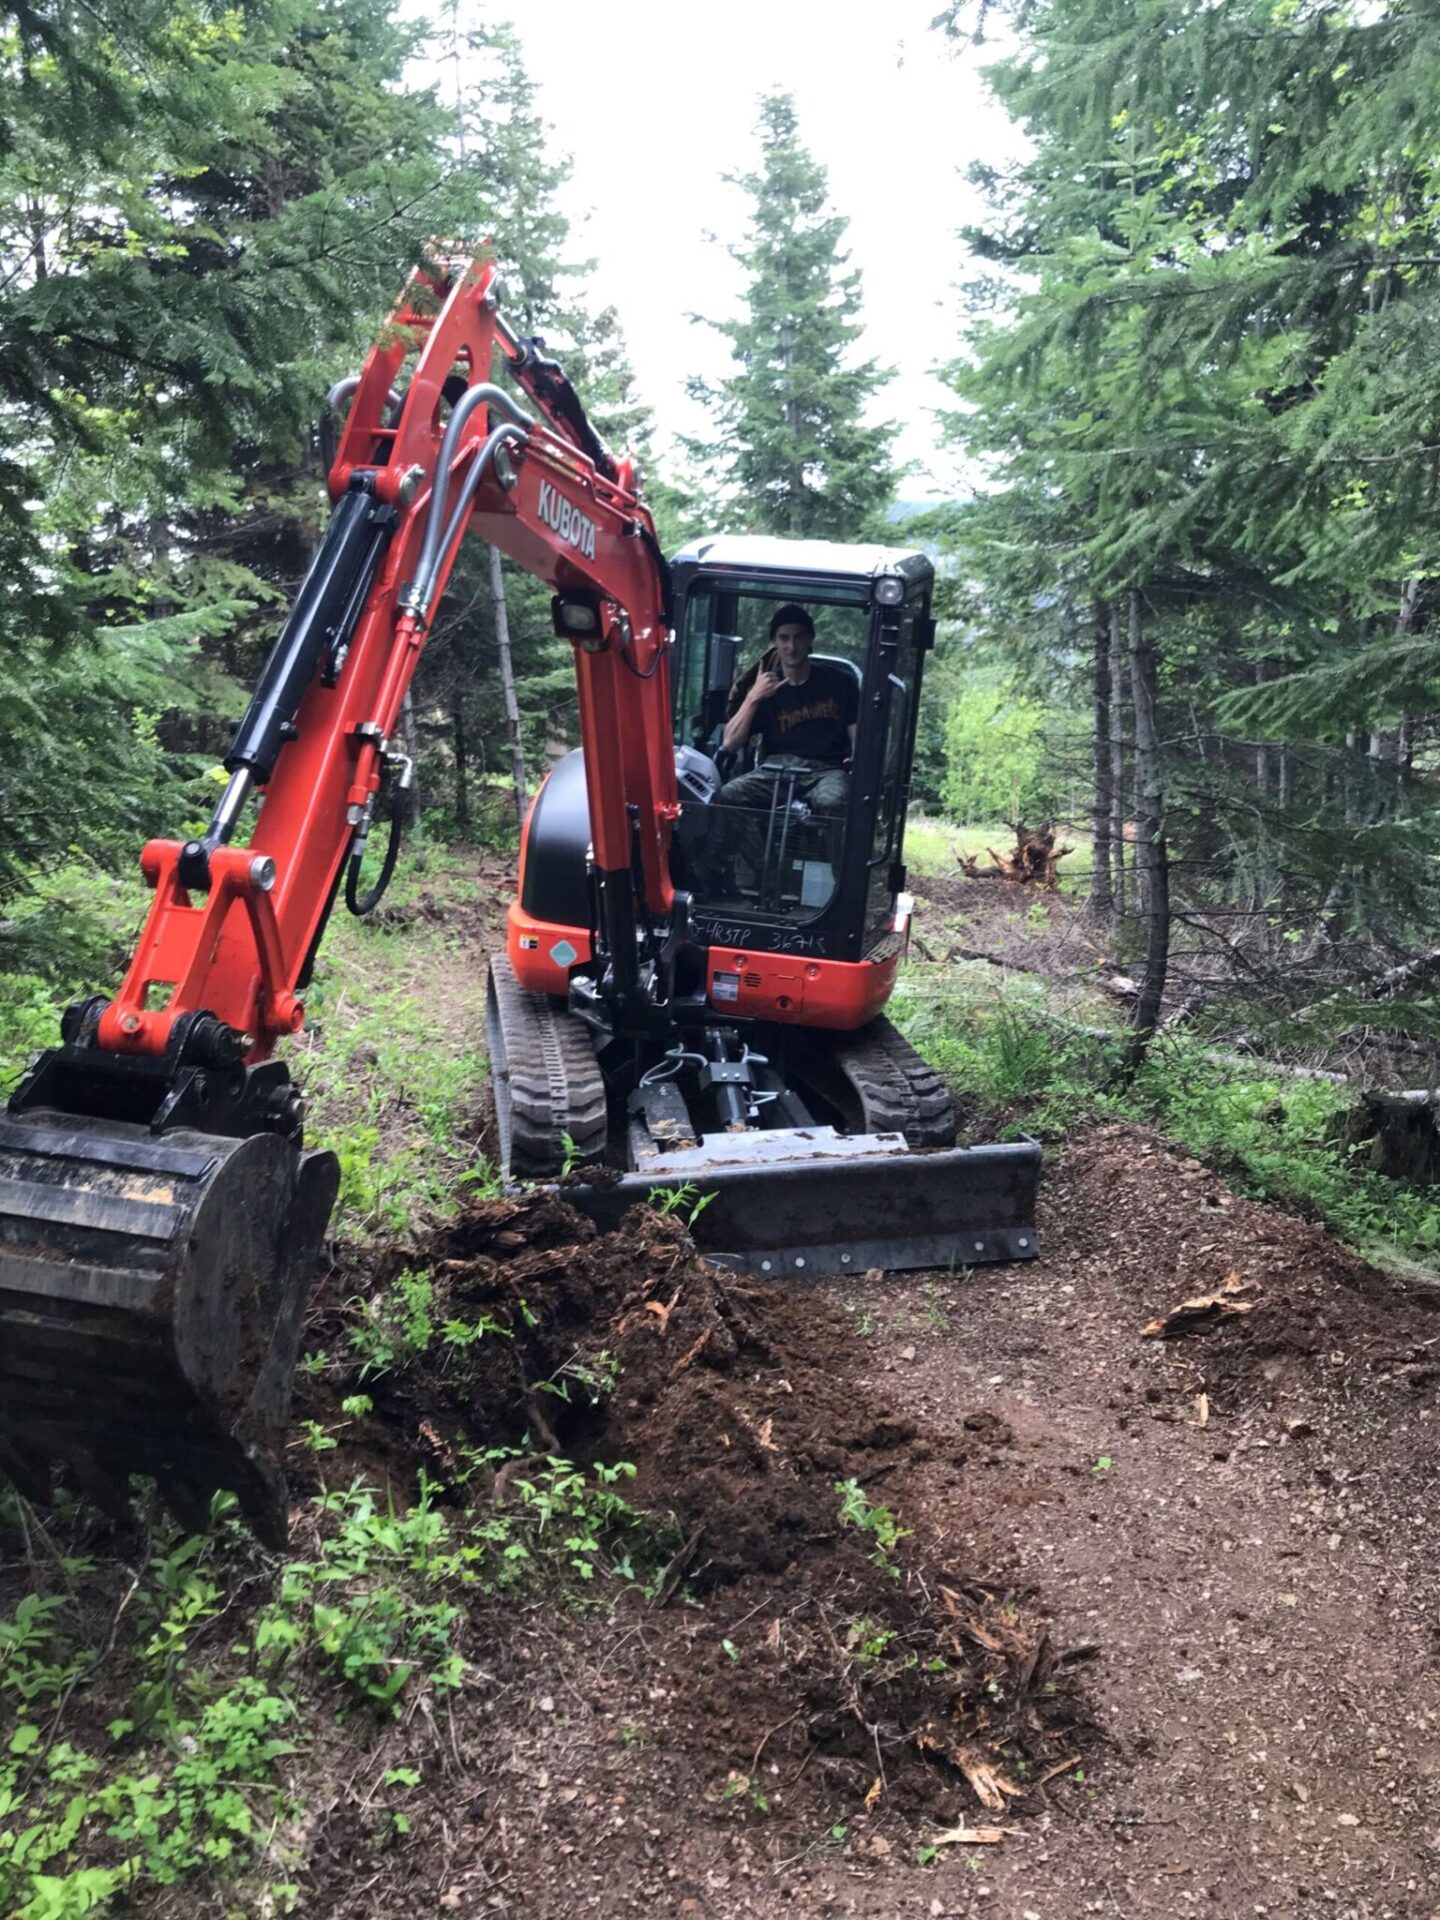 A person in a construction machine, clearing a trail.